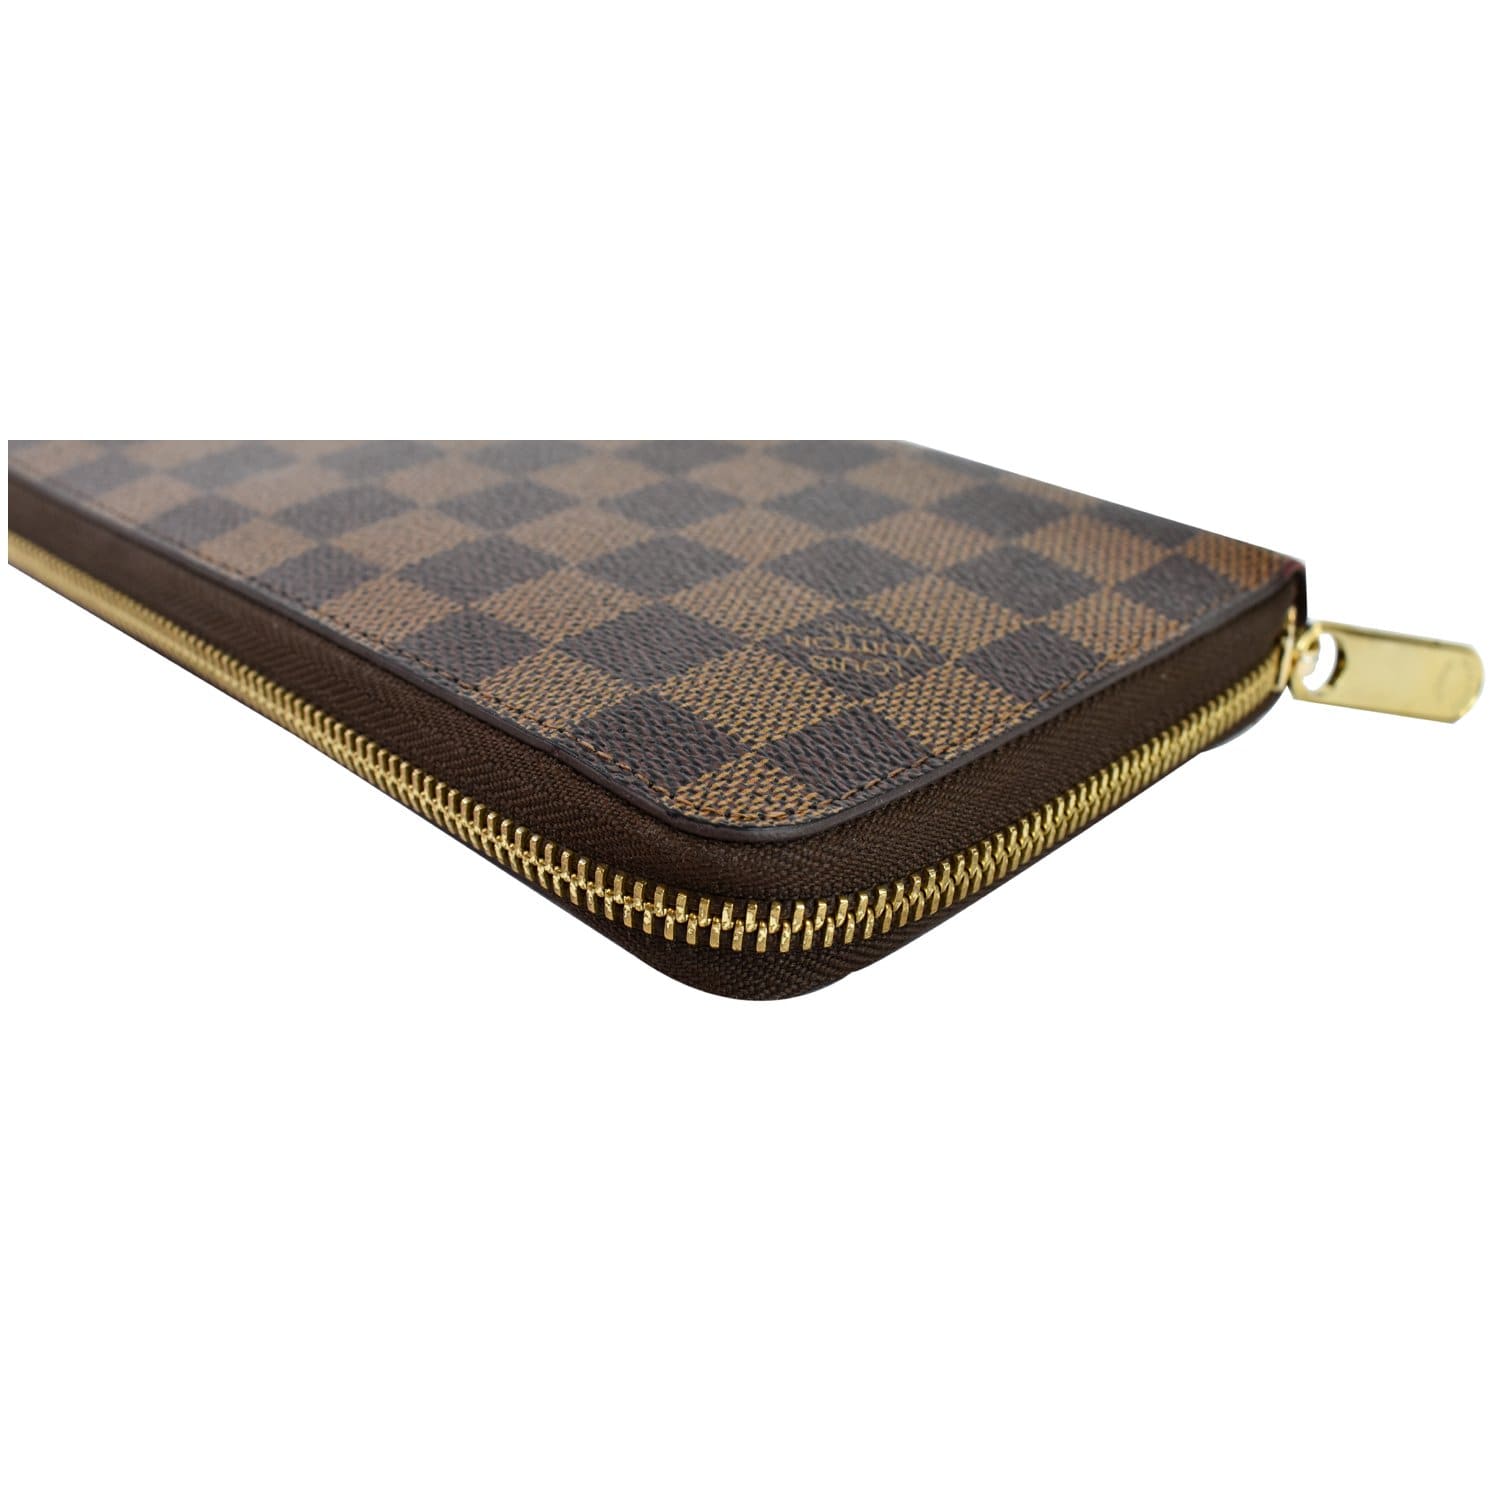 Sold at Auction: Louis Brown, LOUIS VUITTON SQUARE COMPACT ZIPPY WALLET IN  BROWN DAMIER EBENE